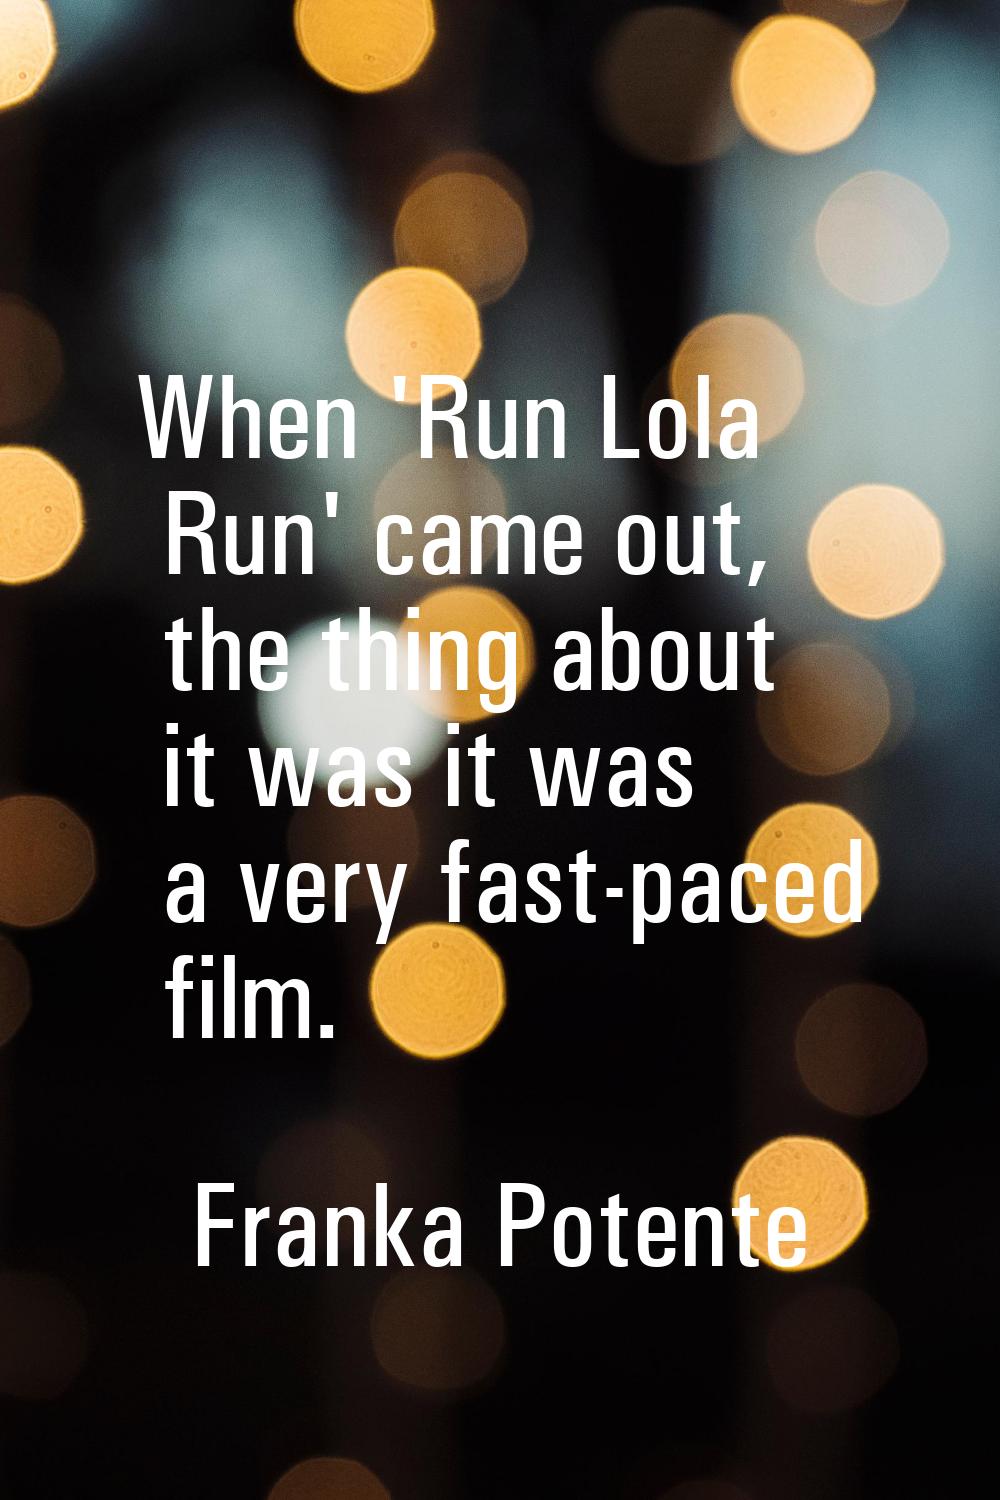 When 'Run Lola Run' came out, the thing about it was it was a very fast-paced film.